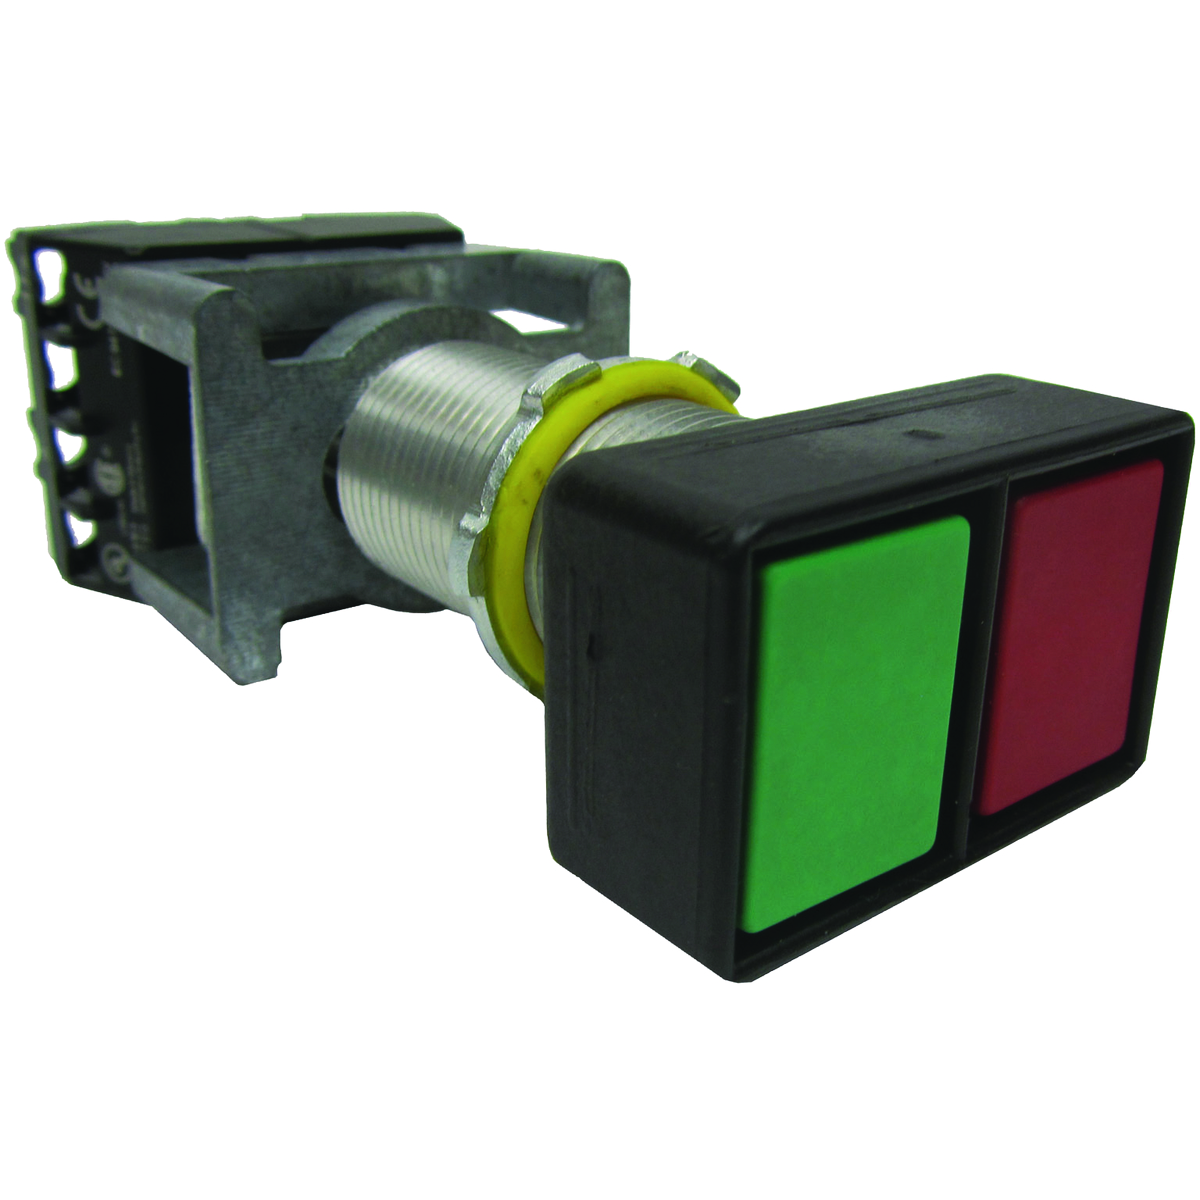 G Series - Long Momentary Contact Double Push Button Operator -Green And  Red Buttons With Start - Stop/Blank Nameplate - 2NO/2NC Contact Rating, GO2-GR33D N34